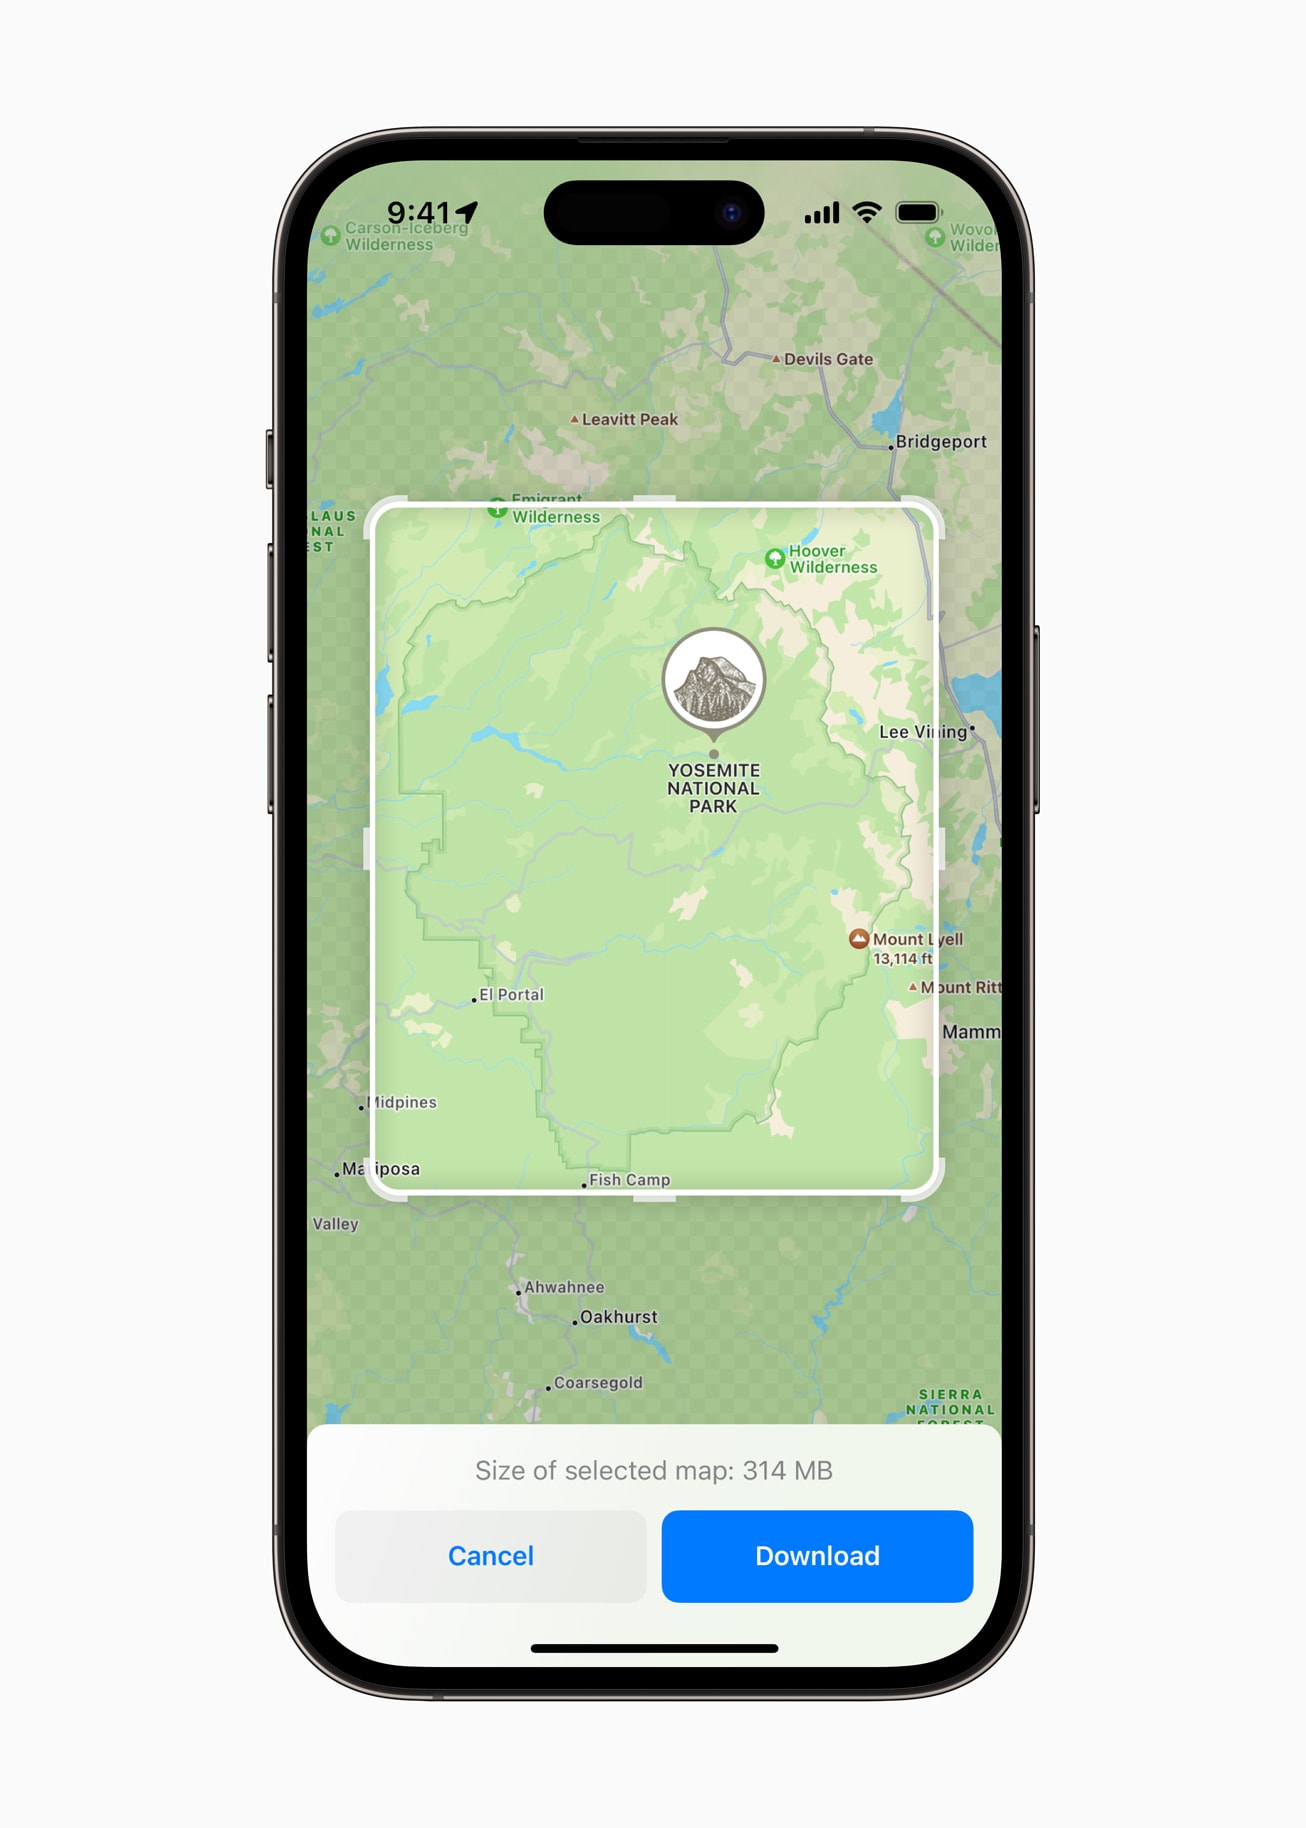 Apple Maps on iOS 17 enables offline maps download.